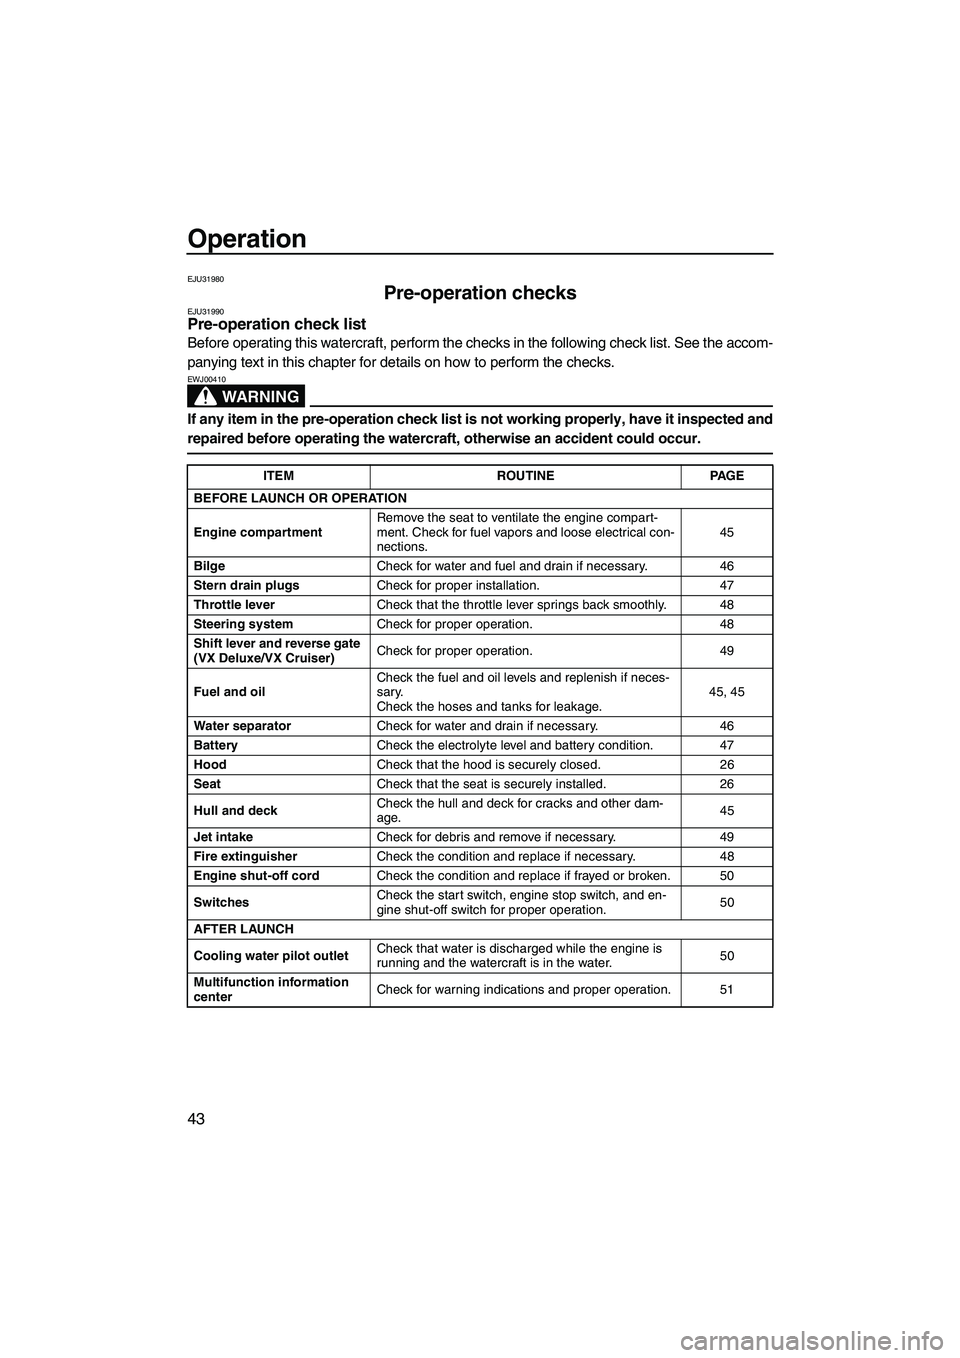 YAMAHA VX 2007  Owners Manual Operation
43
EJU31980
Pre-operation checks EJU31990Pre-operation check list 
Before operating this watercraft, perform the checks in the following check list. See the accom-
panying text in this chapt